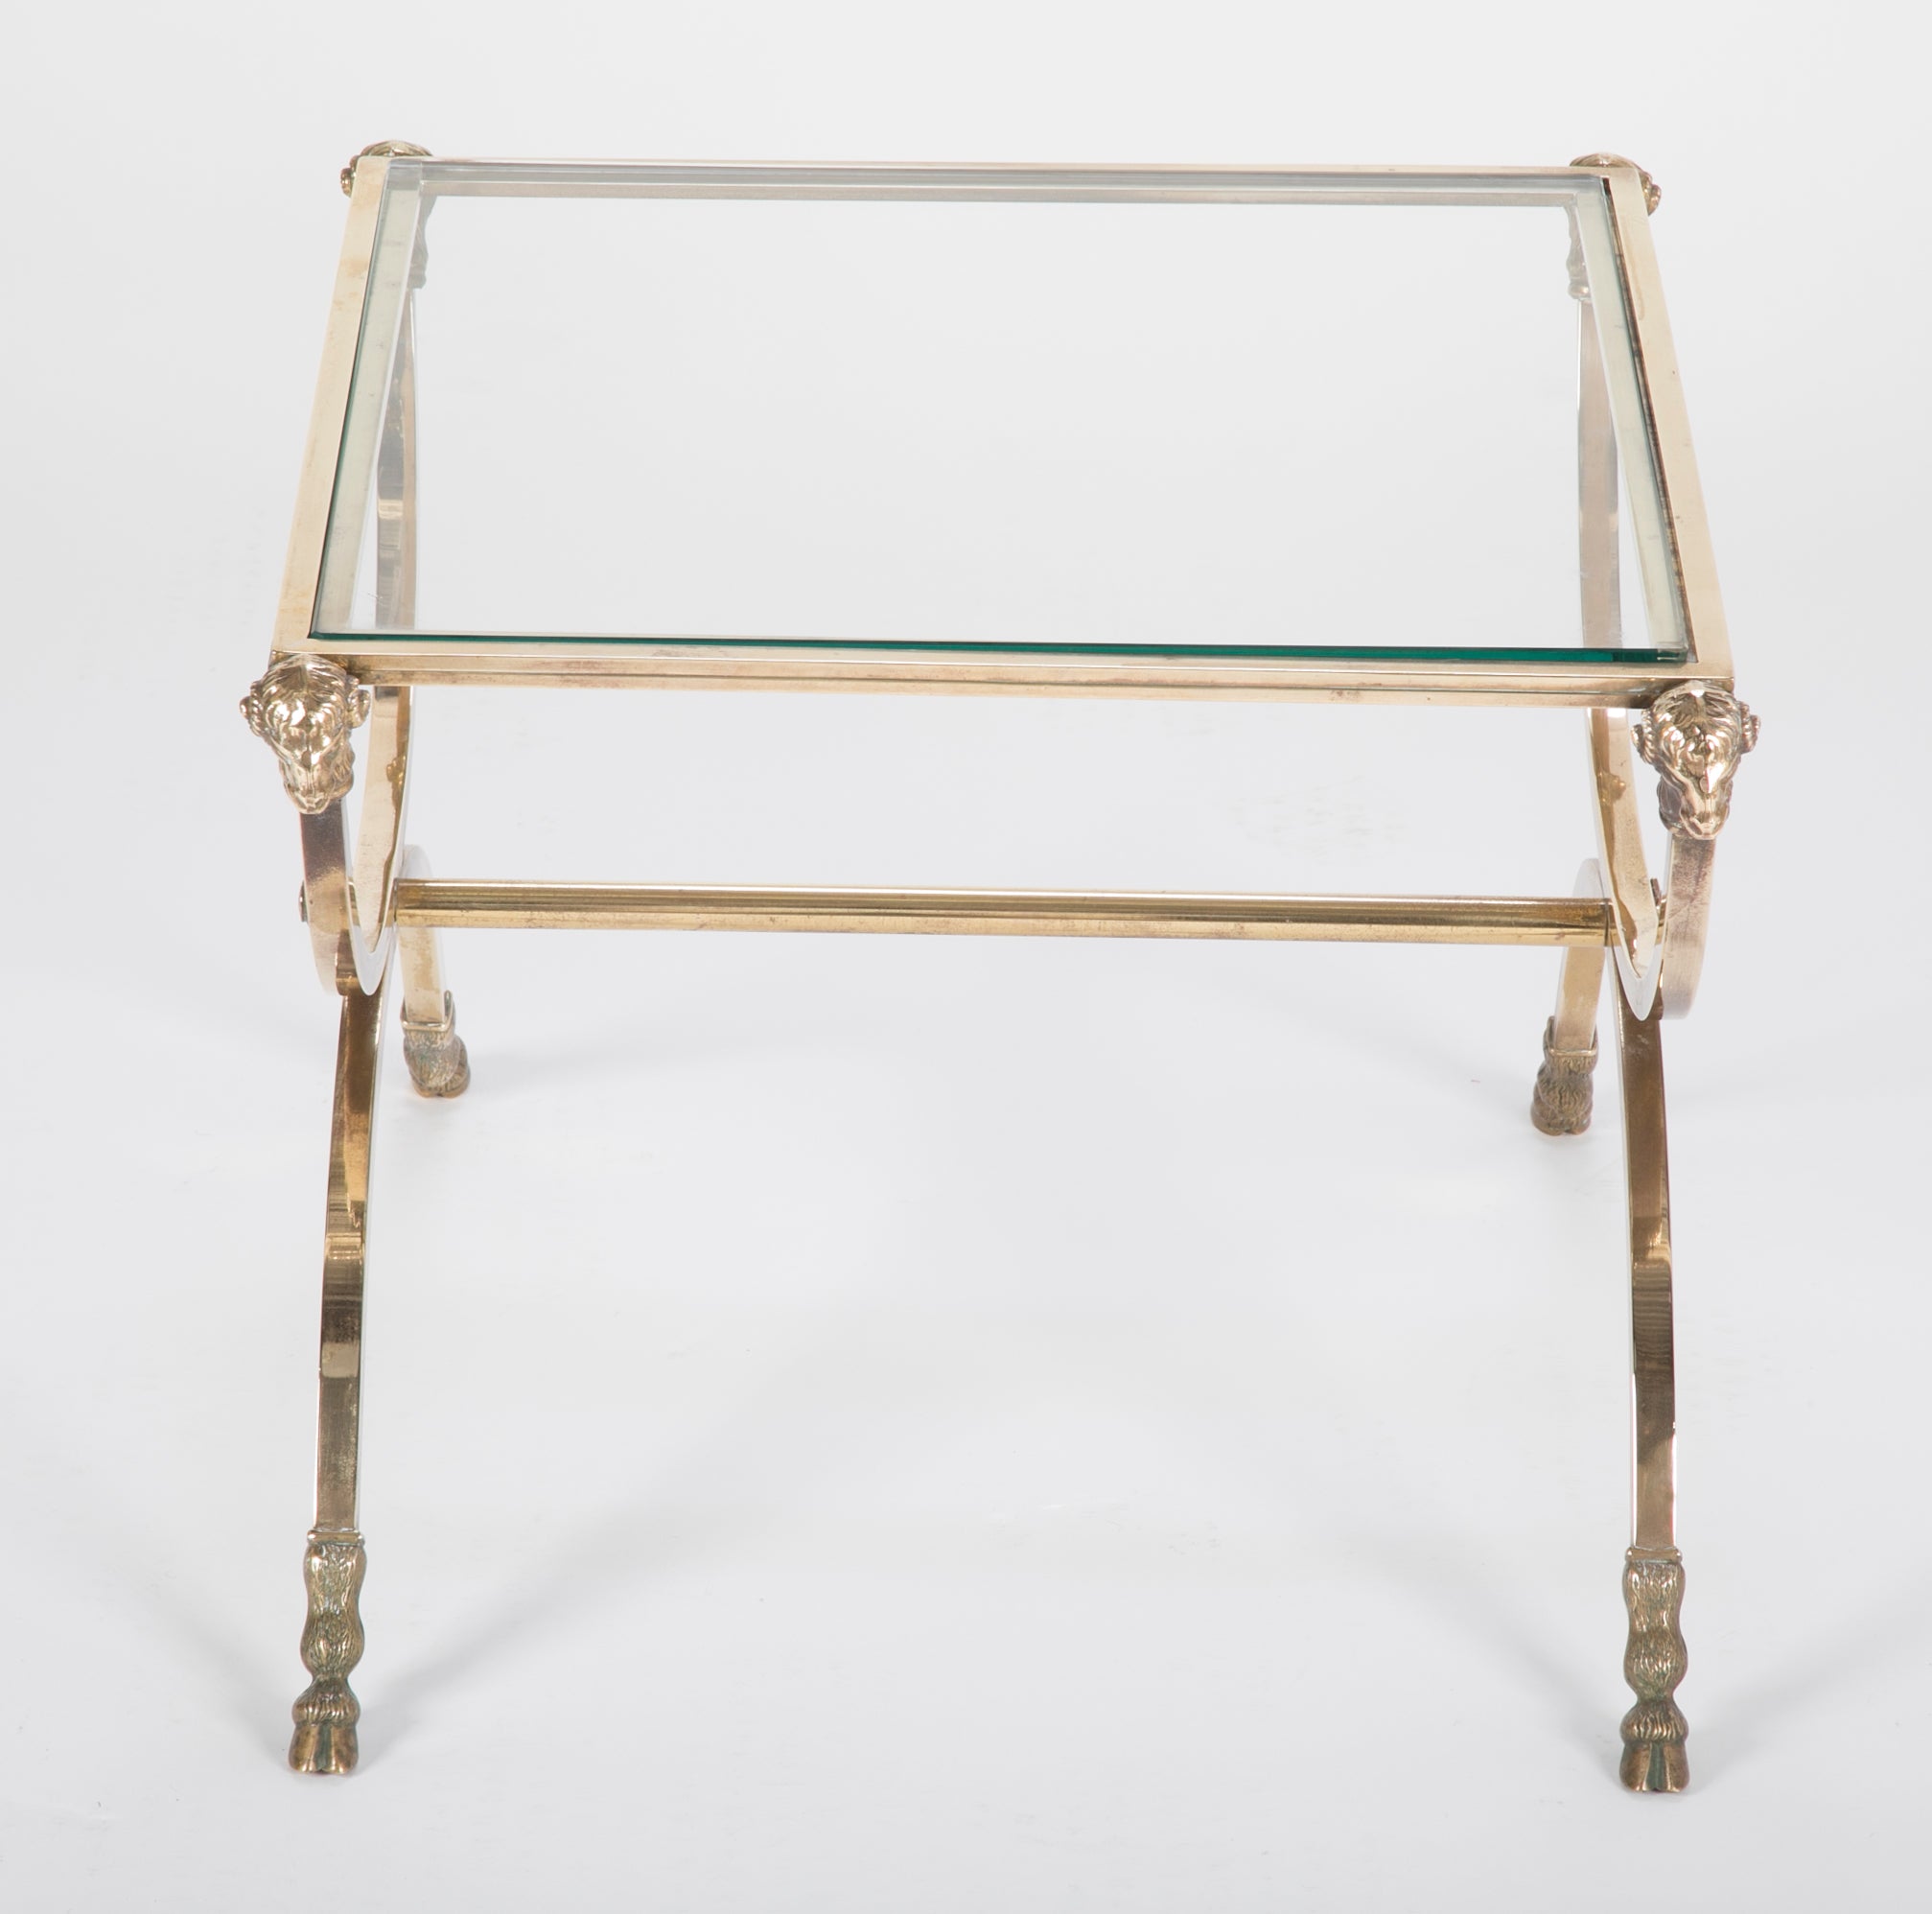 Italian Neoclassical Style Bronze & Glass Side Table